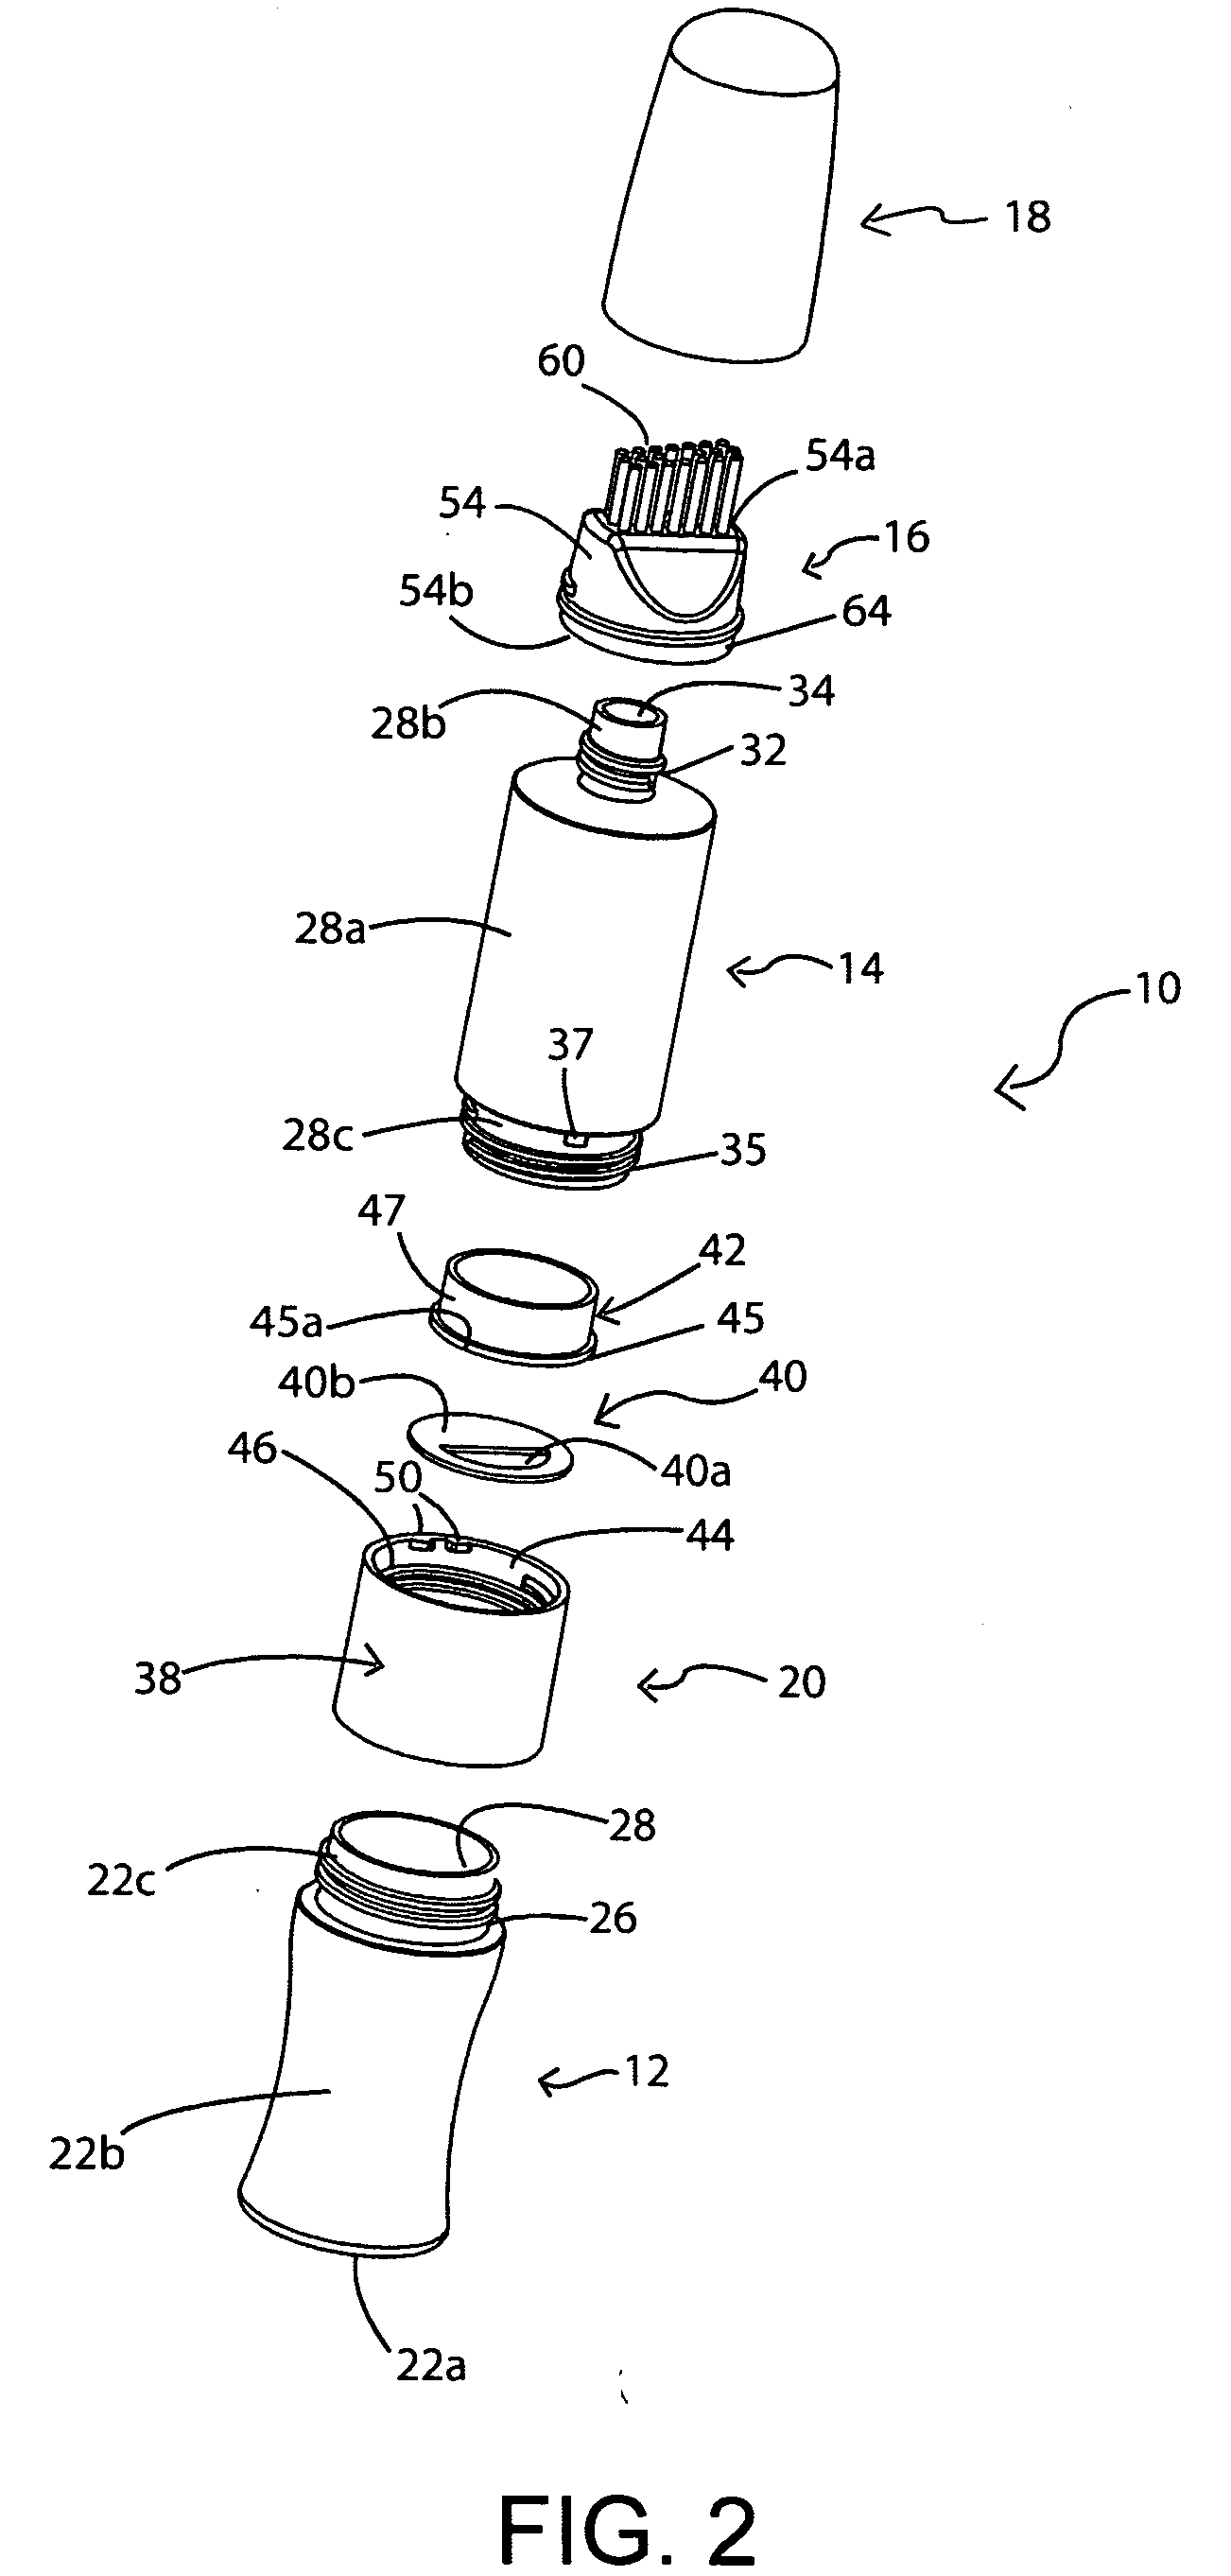 Hair dye touch-up dispenser and method of using the same